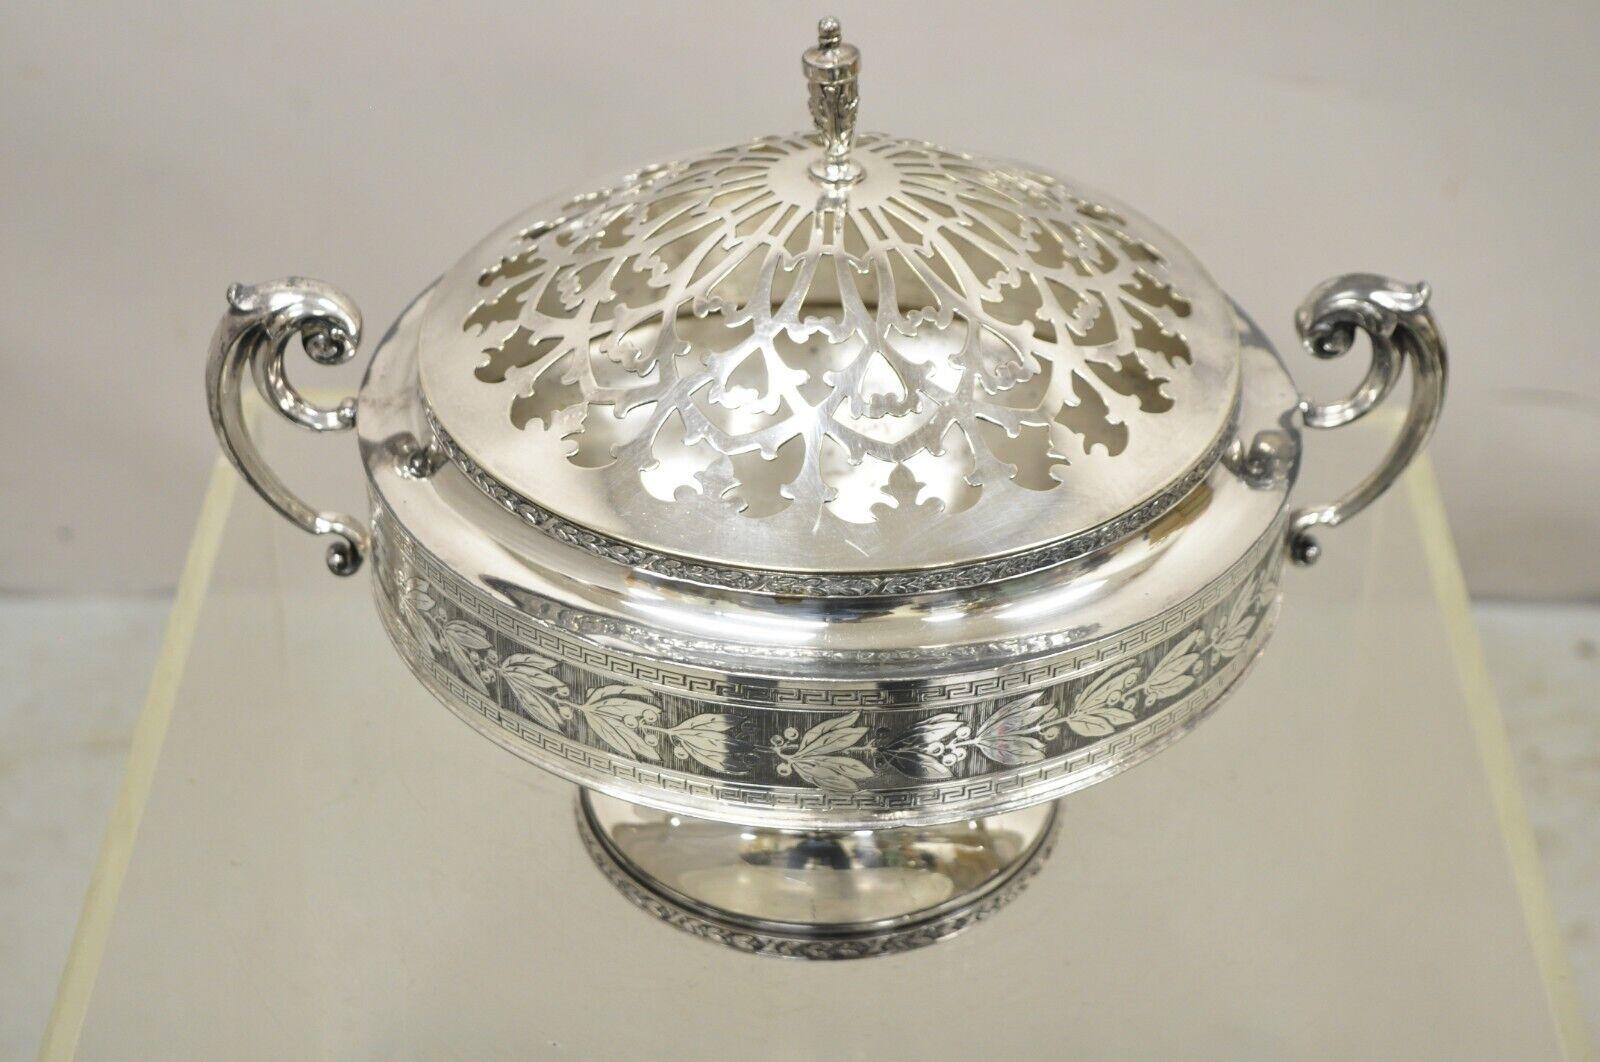 Antique Wallace Bros & Co. Silver Plated Victorian Butter Dish Reticulated Lid. Item features the original hallmark, very nice antique item, quality craftsmanship, great style and form. Circa 1900s. Measurements: 10